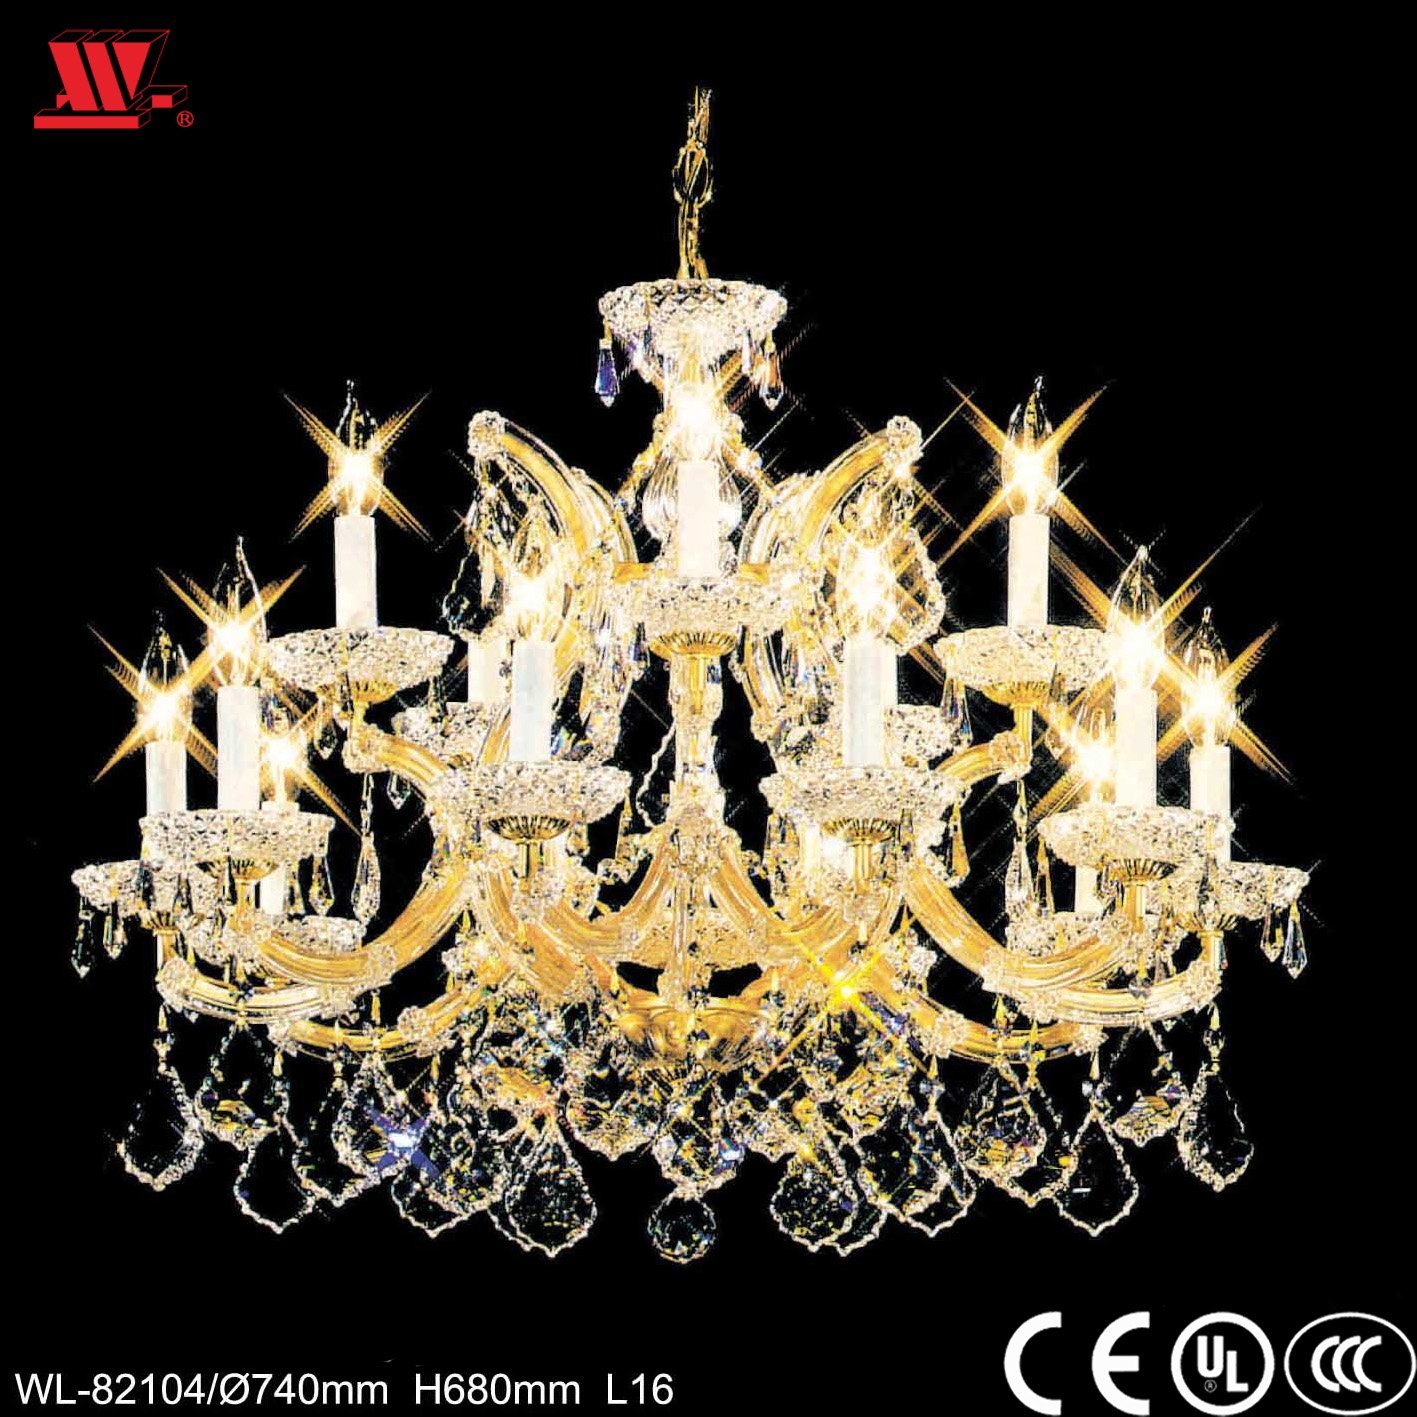 Crystal Chandelier with Glass Chains 82104